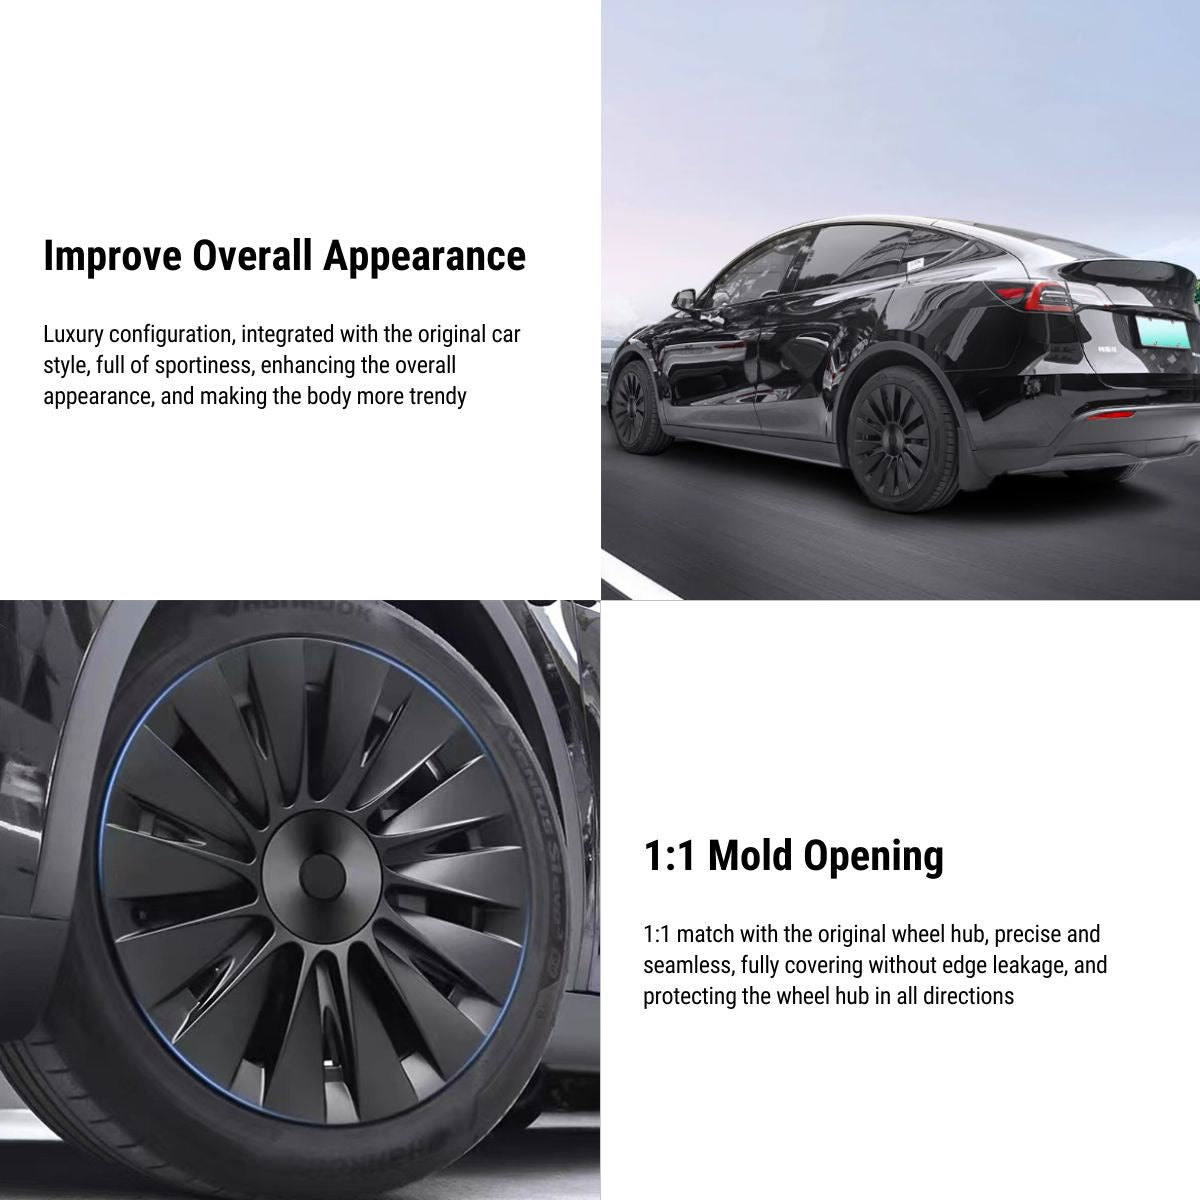 TESERY 19‘’ Performance HubCaps for Tesla Model Y 2020-2024 4PCS - Tesery Official Store